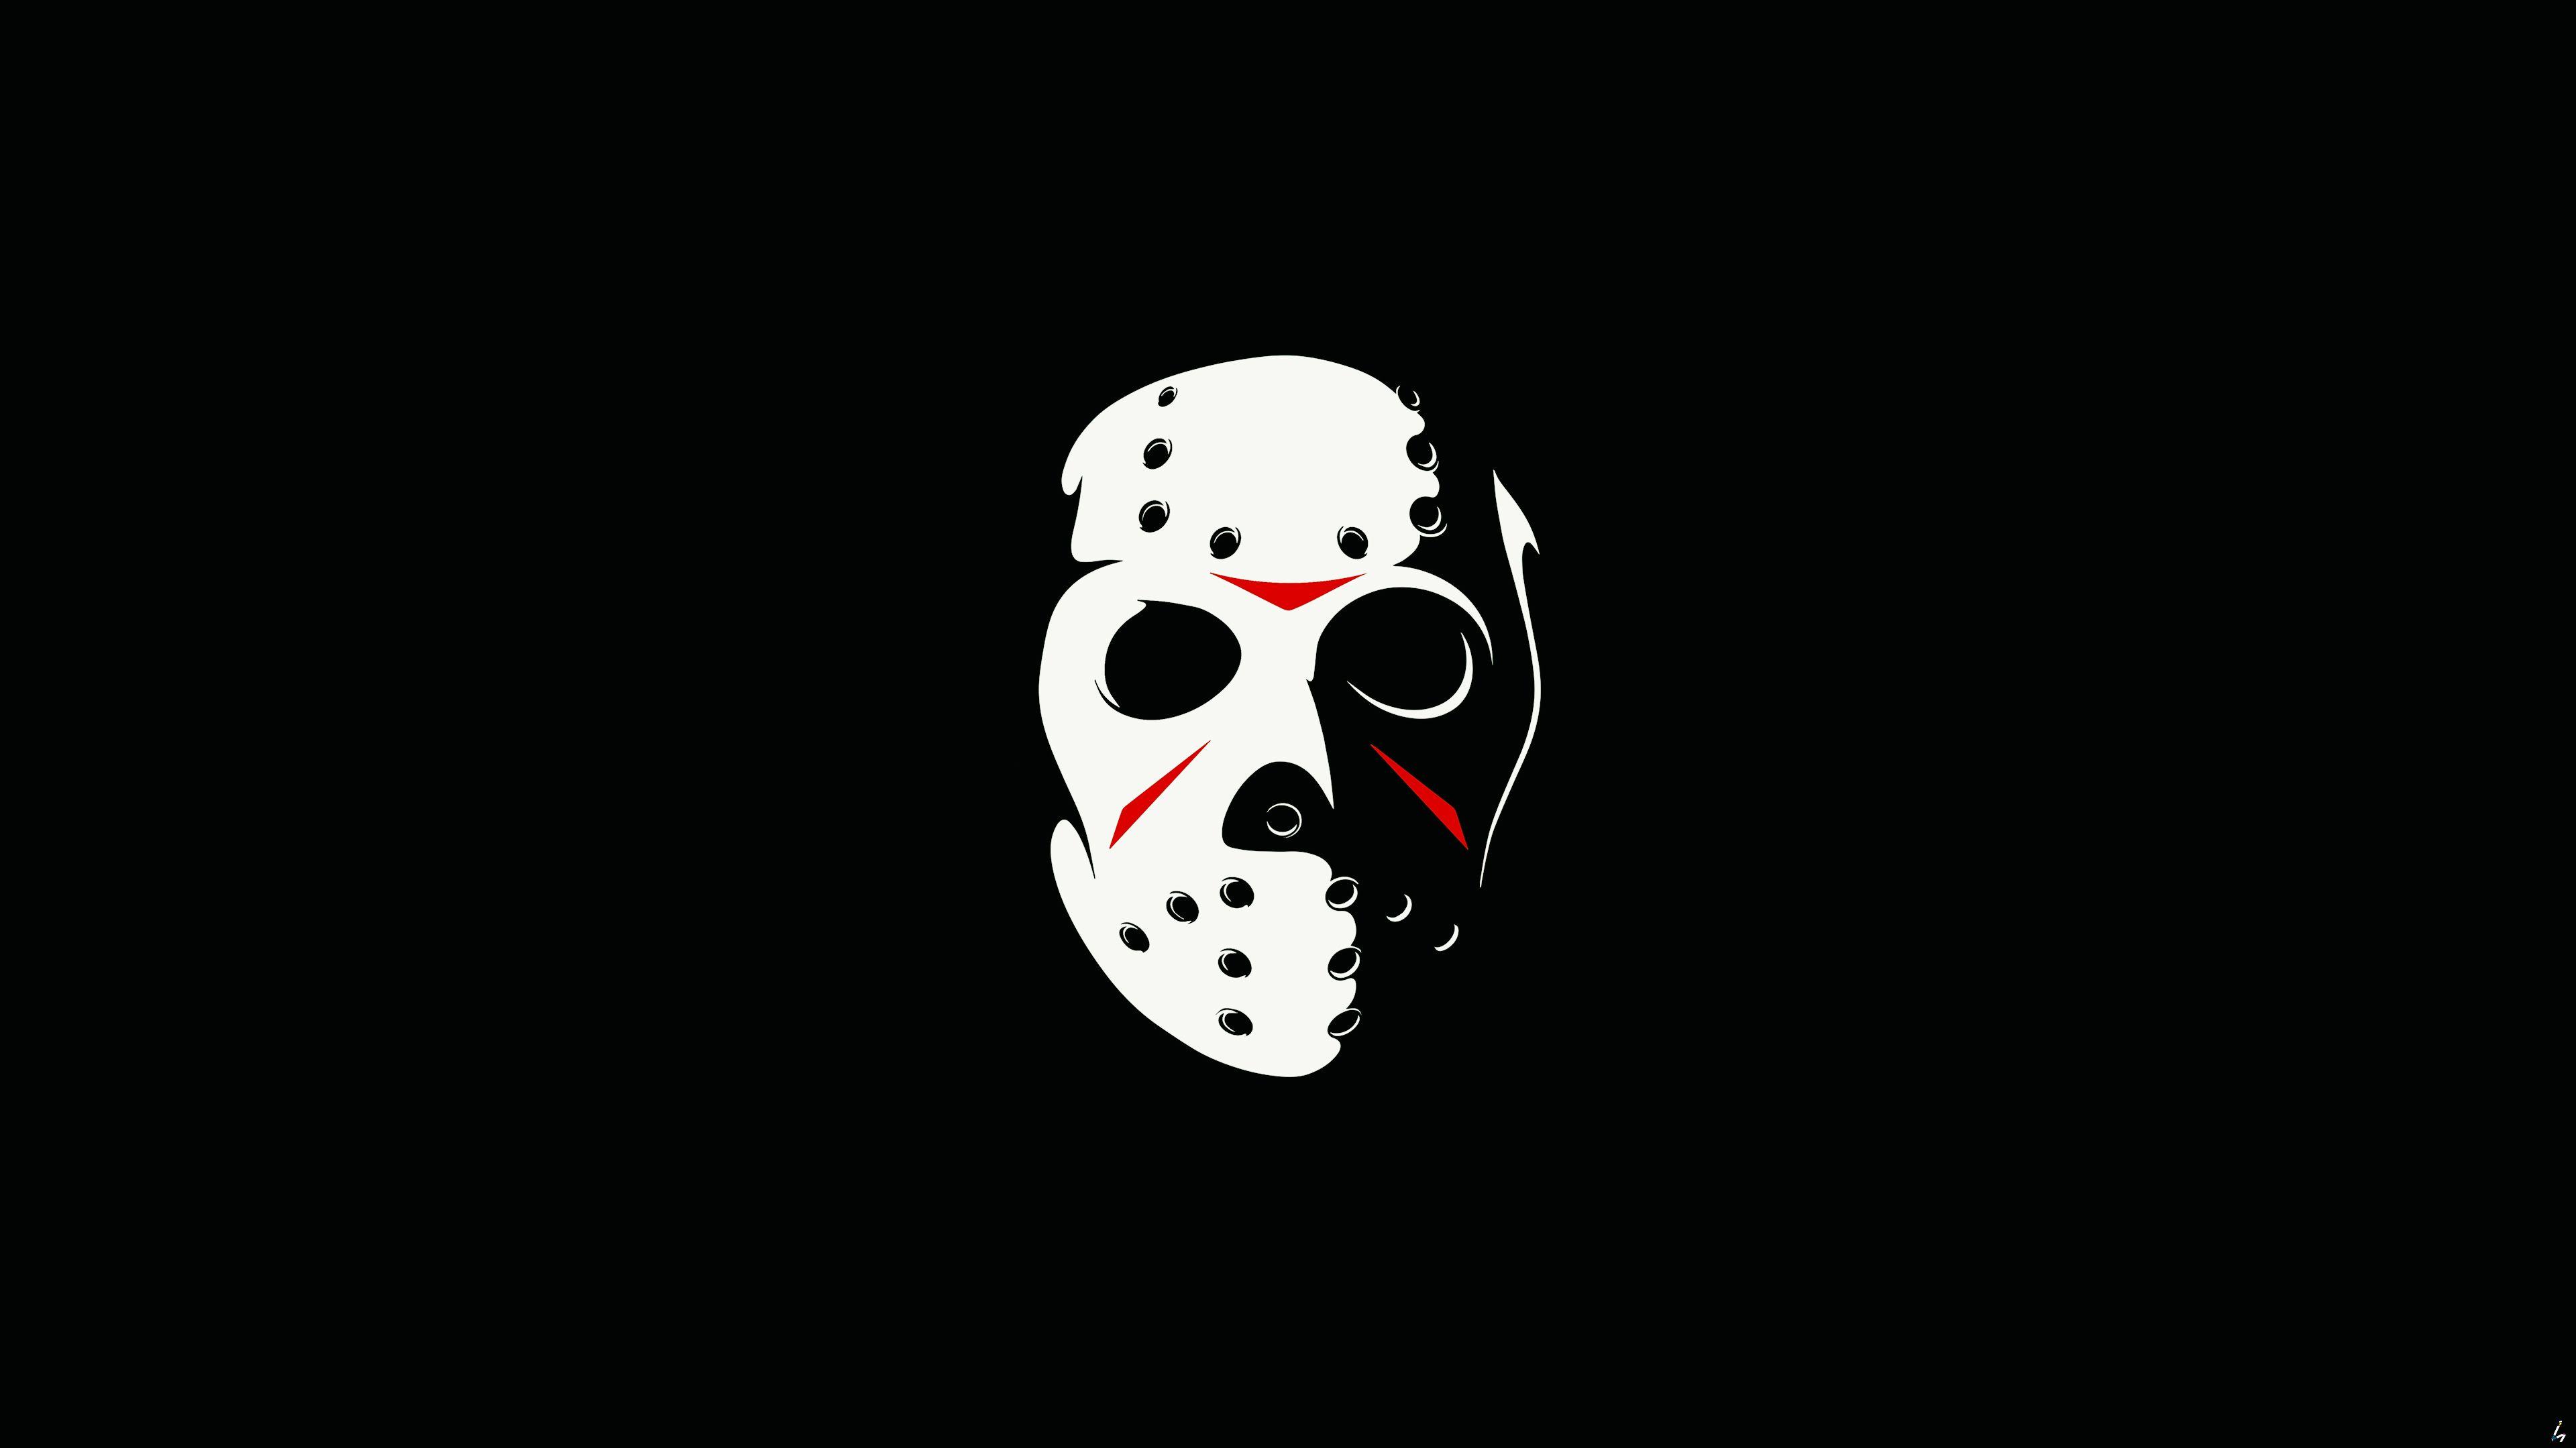 Free download Friday The 13th The Game Minimalism Dark 4k hd